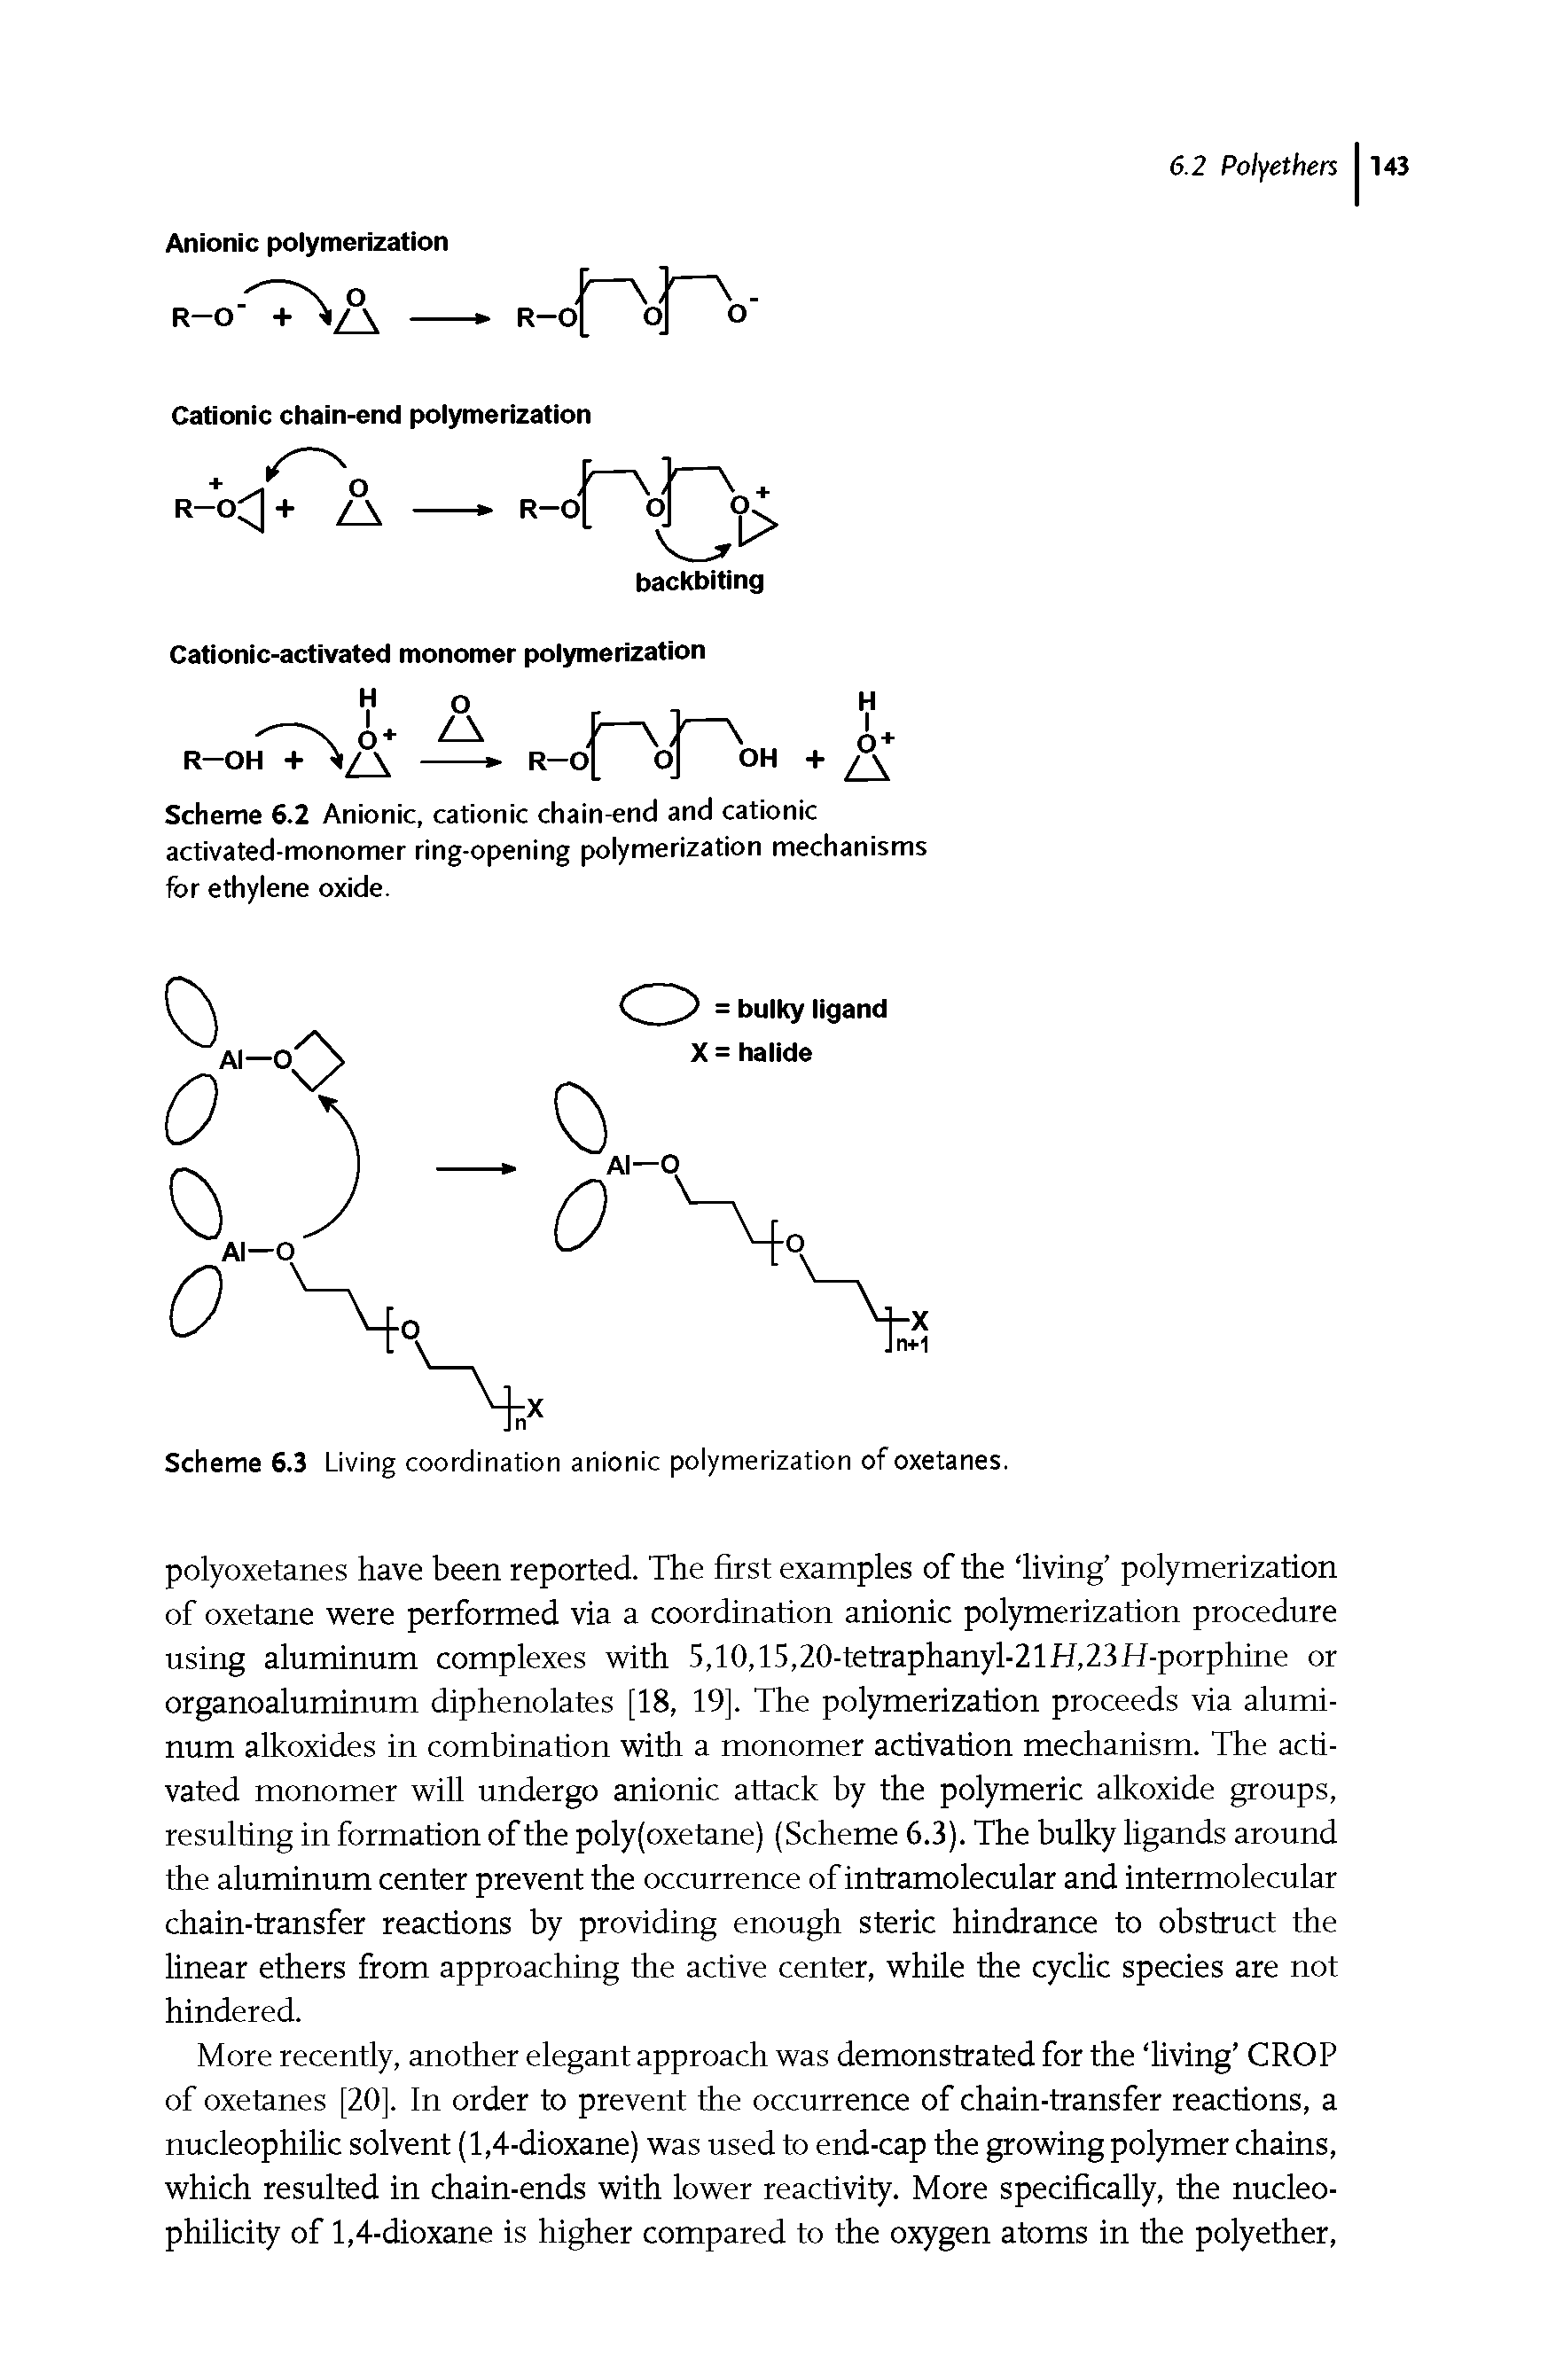 Scheme 6.2 Anionic, cationic chain-end and cationic activated-monomer ring-opening polymerization mechanisms for ethylene oxide.